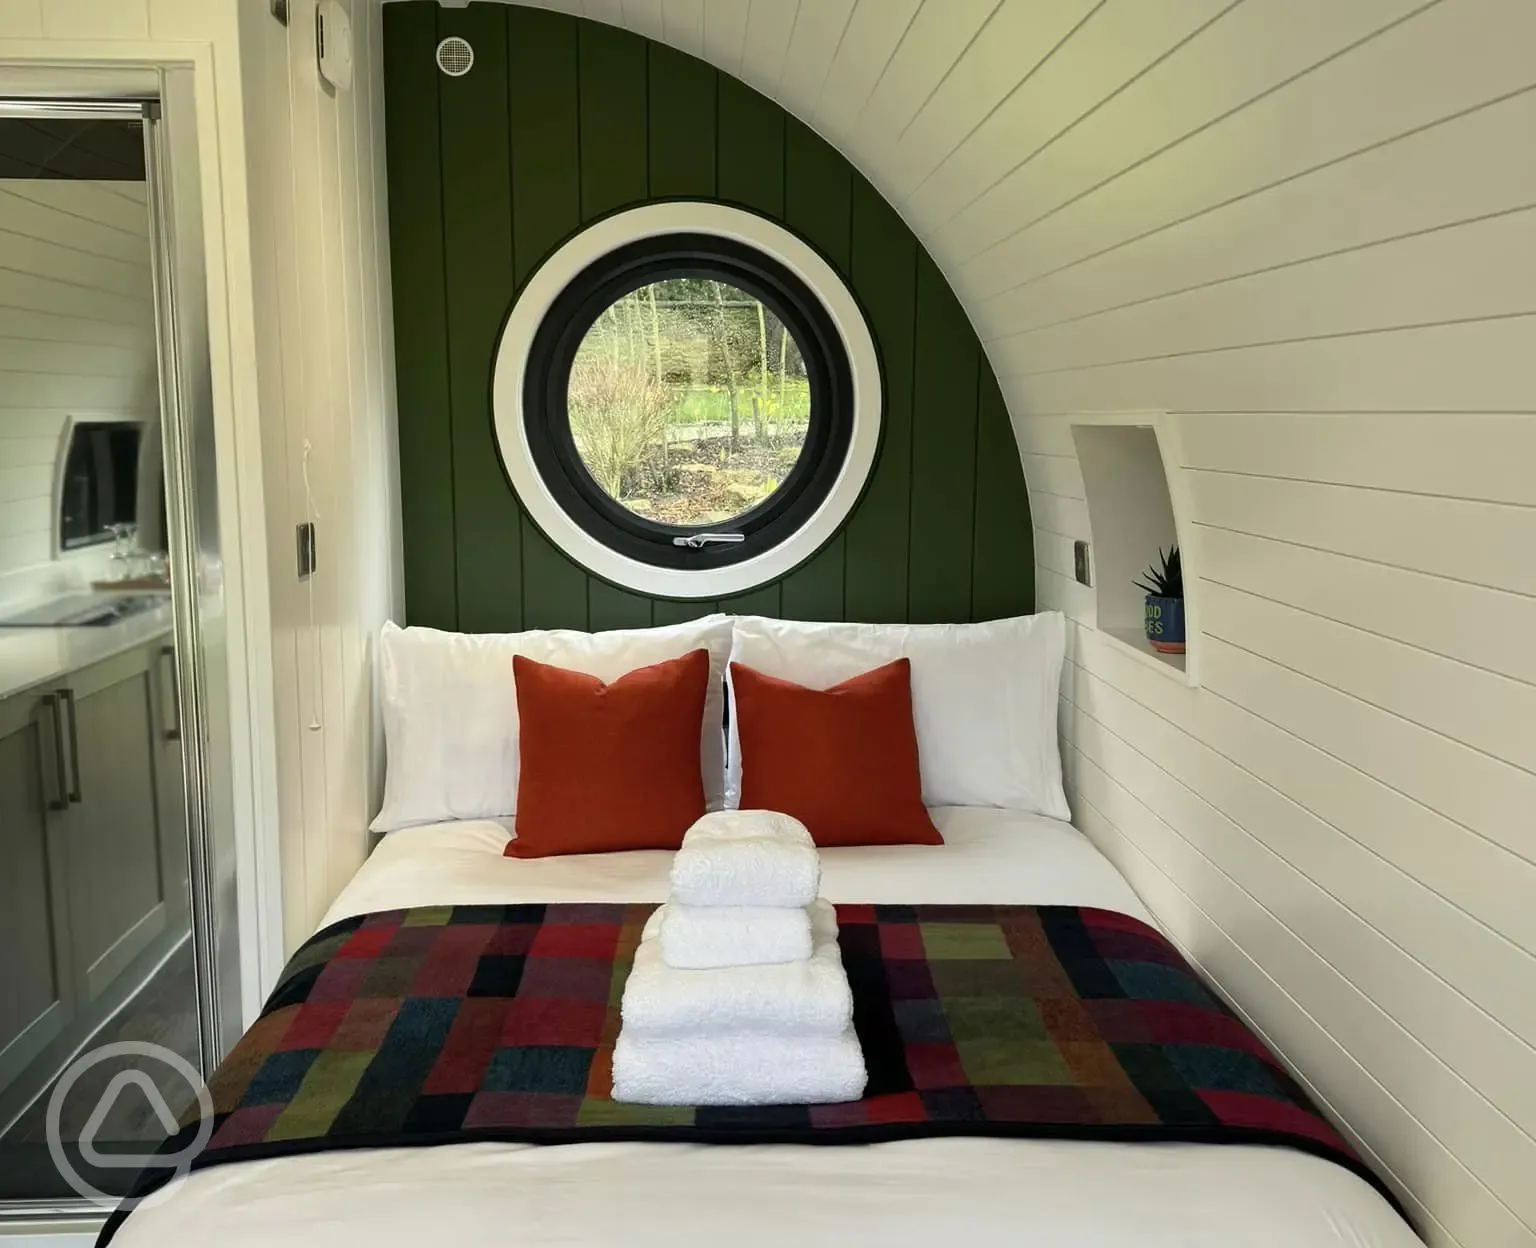 Glamping pod double bed with full bed linen